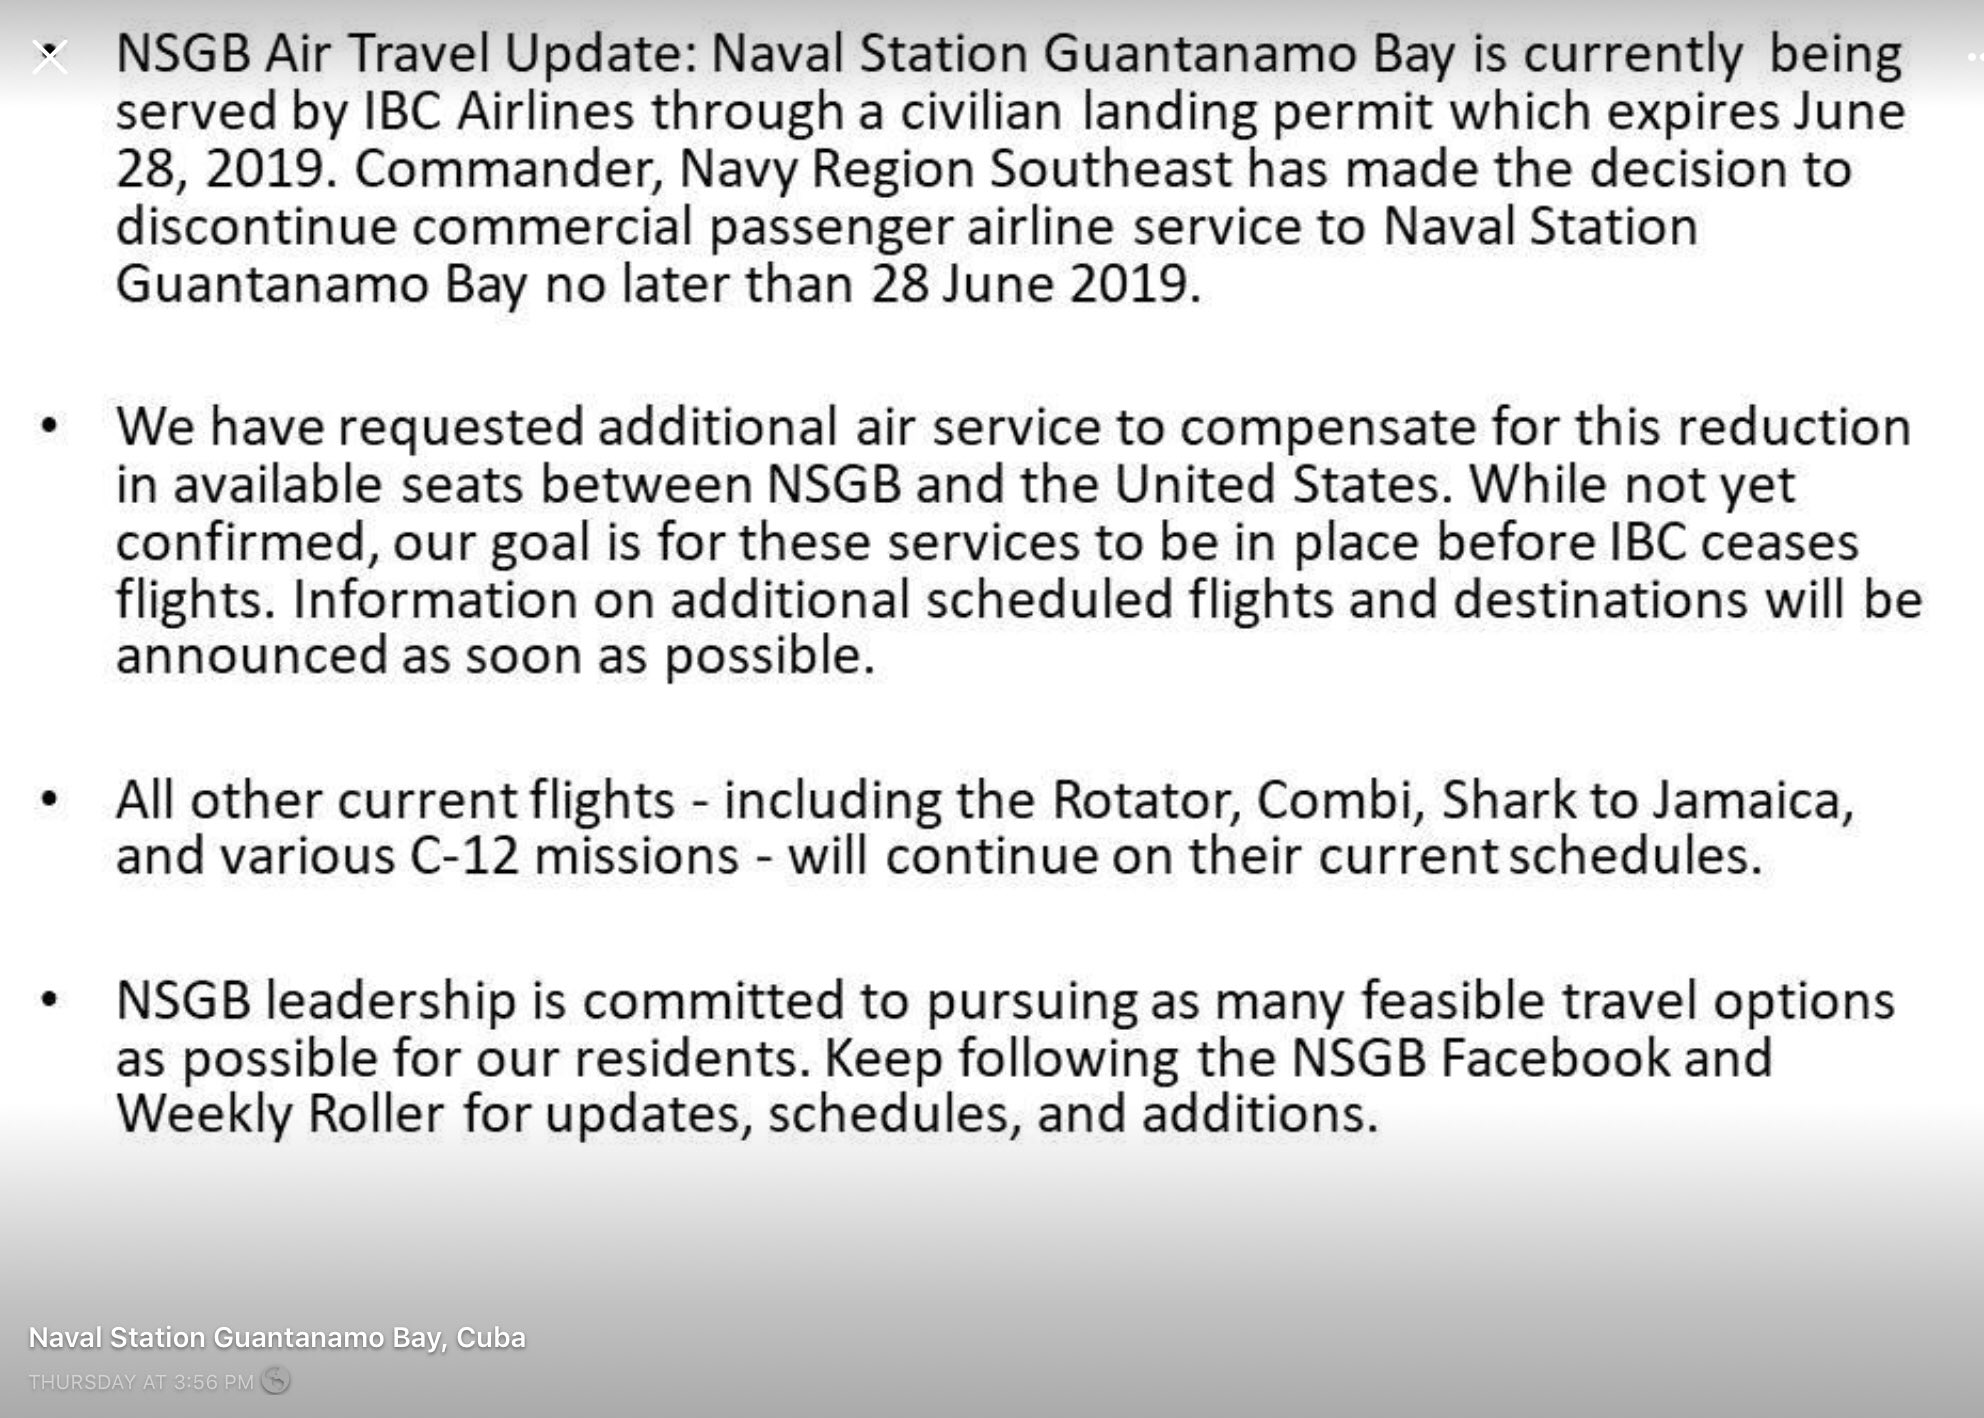 ? MilSpec Ops Monkey ? on Twitter: "GTMO 2.0 SITREP:  We are about to see a tempo change to and from the island due to a civilian landing permit being terminated. This means it will be a little harder to track what’s coming and going. Note the “NLT June 2019 date”.… https://t.co/SFtrTvf2zn"